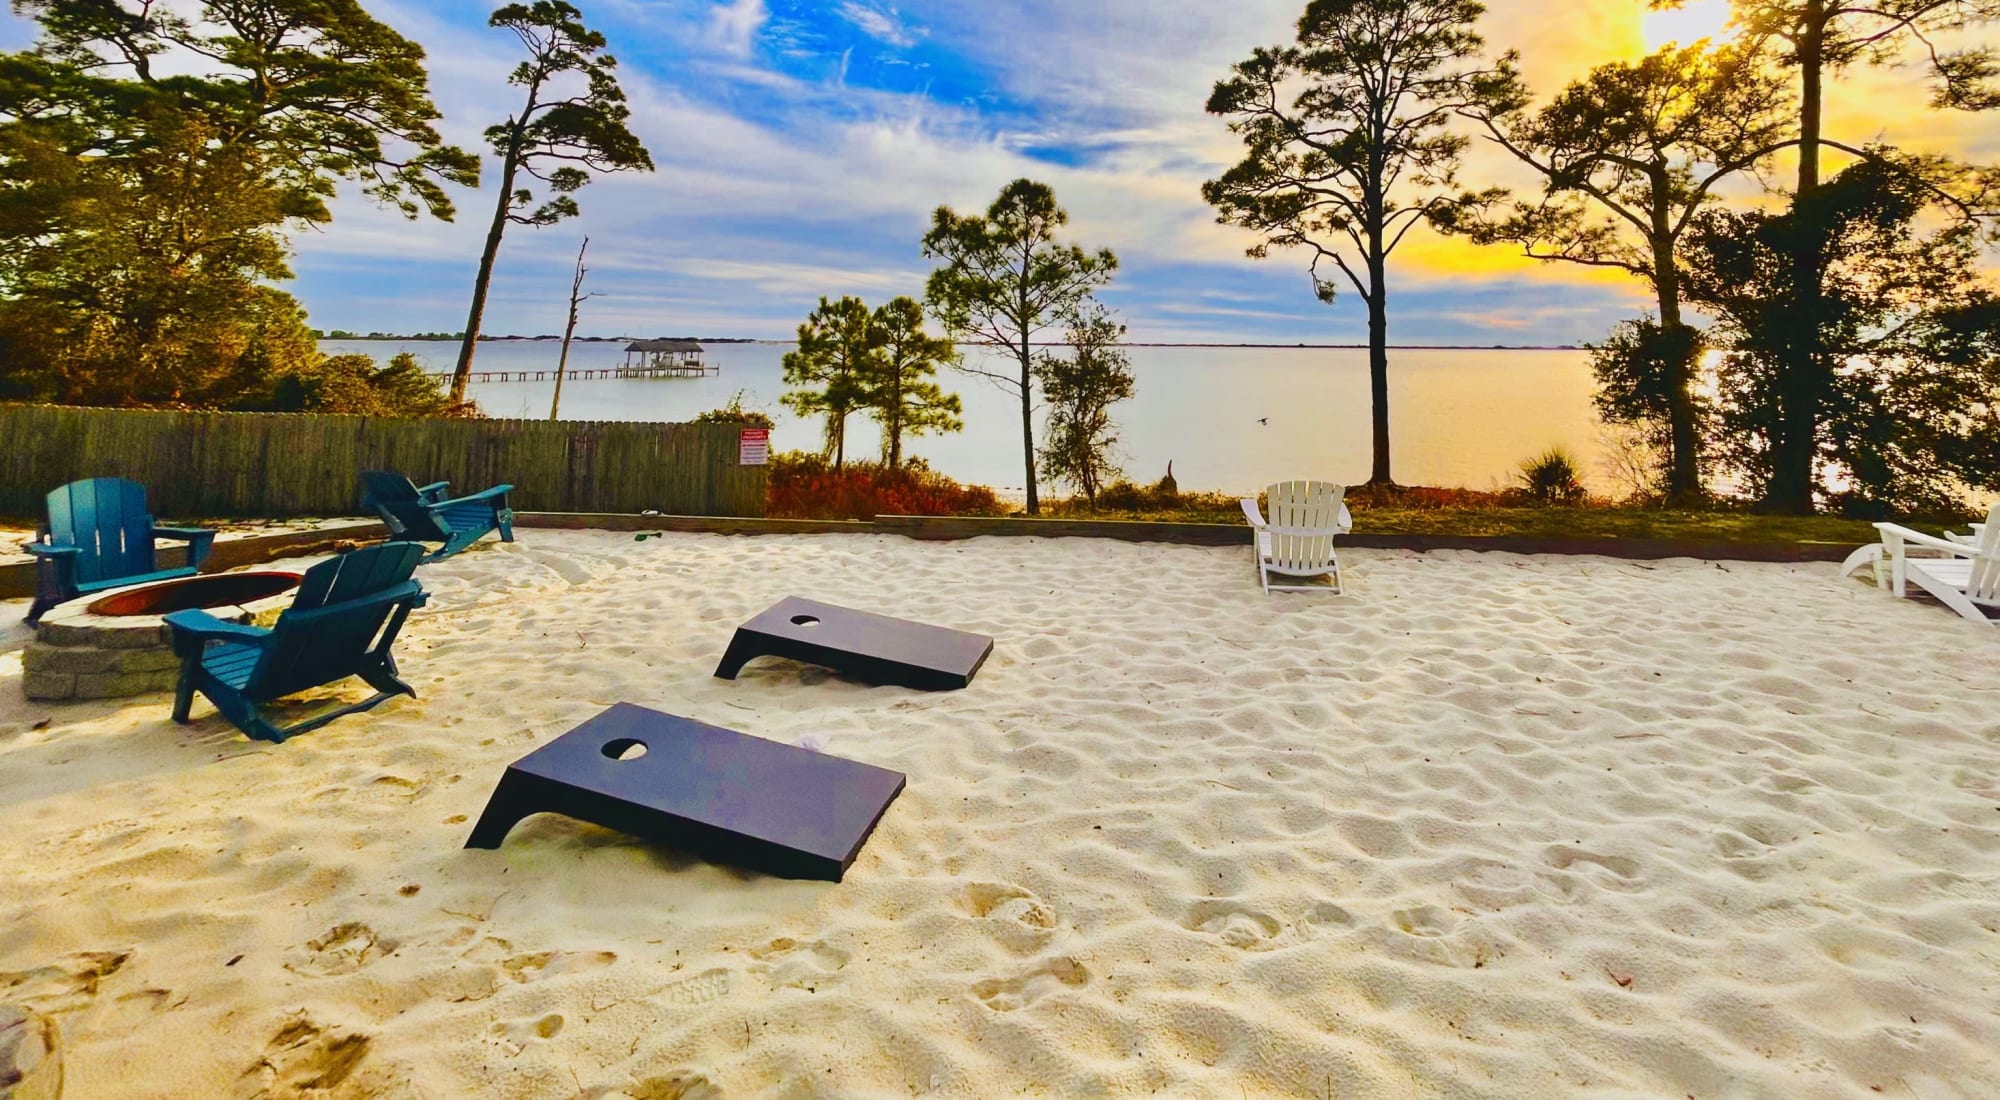 Sandy amenities with cornhole and chairs Amenities at Emerald Shores in Mary Esther, Florida